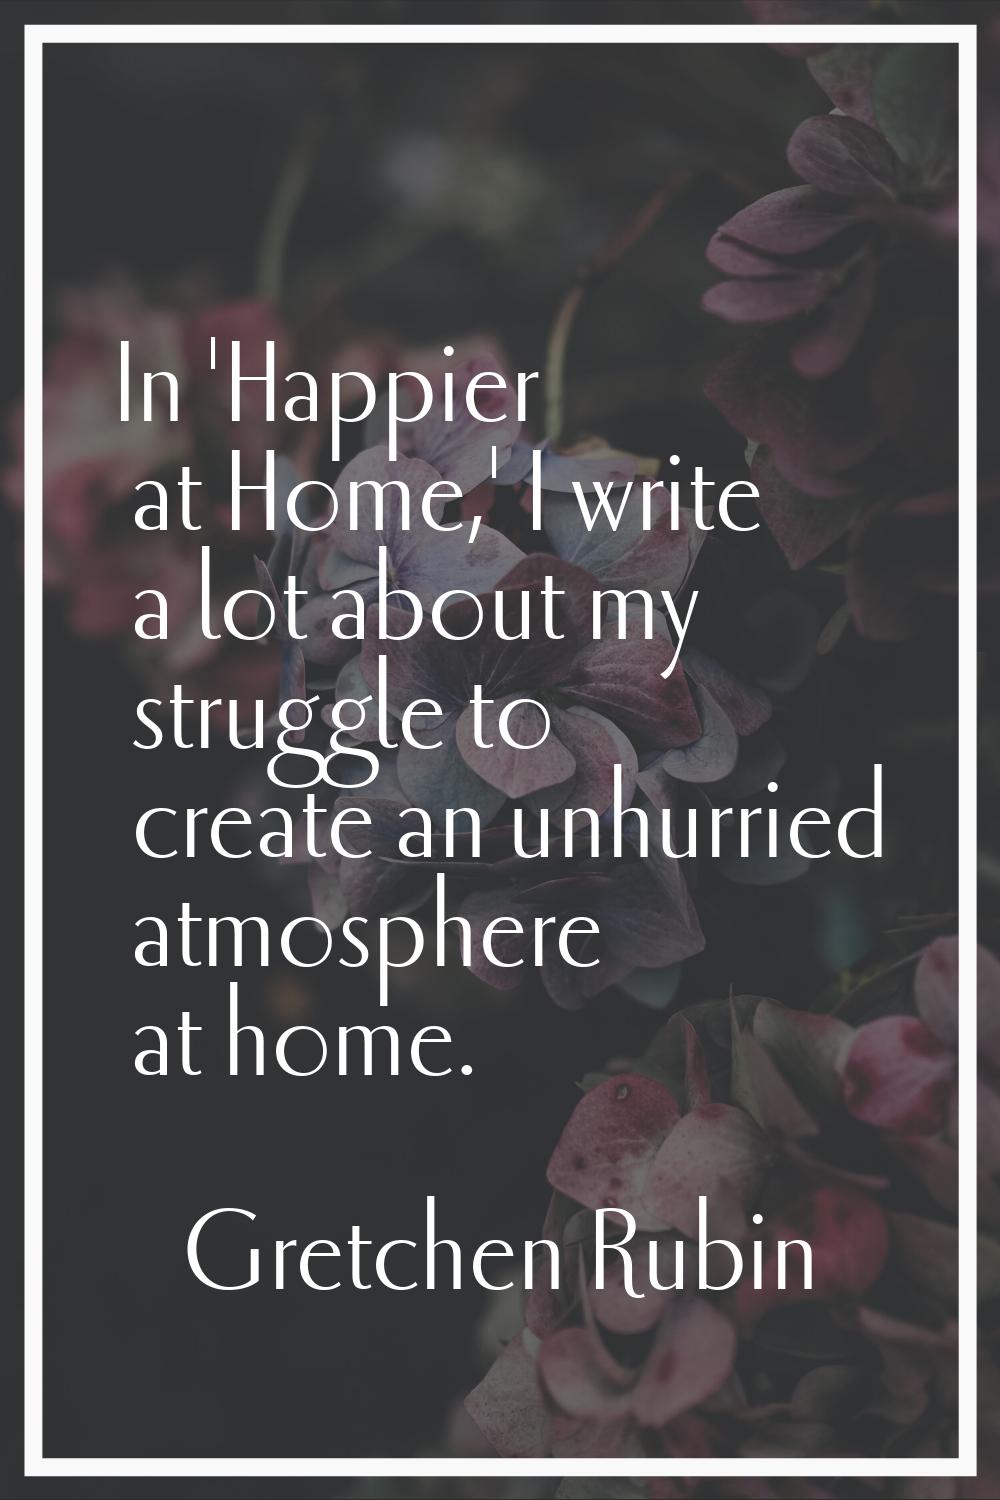 In 'Happier at Home,' I write a lot about my struggle to create an unhurried atmosphere at home.